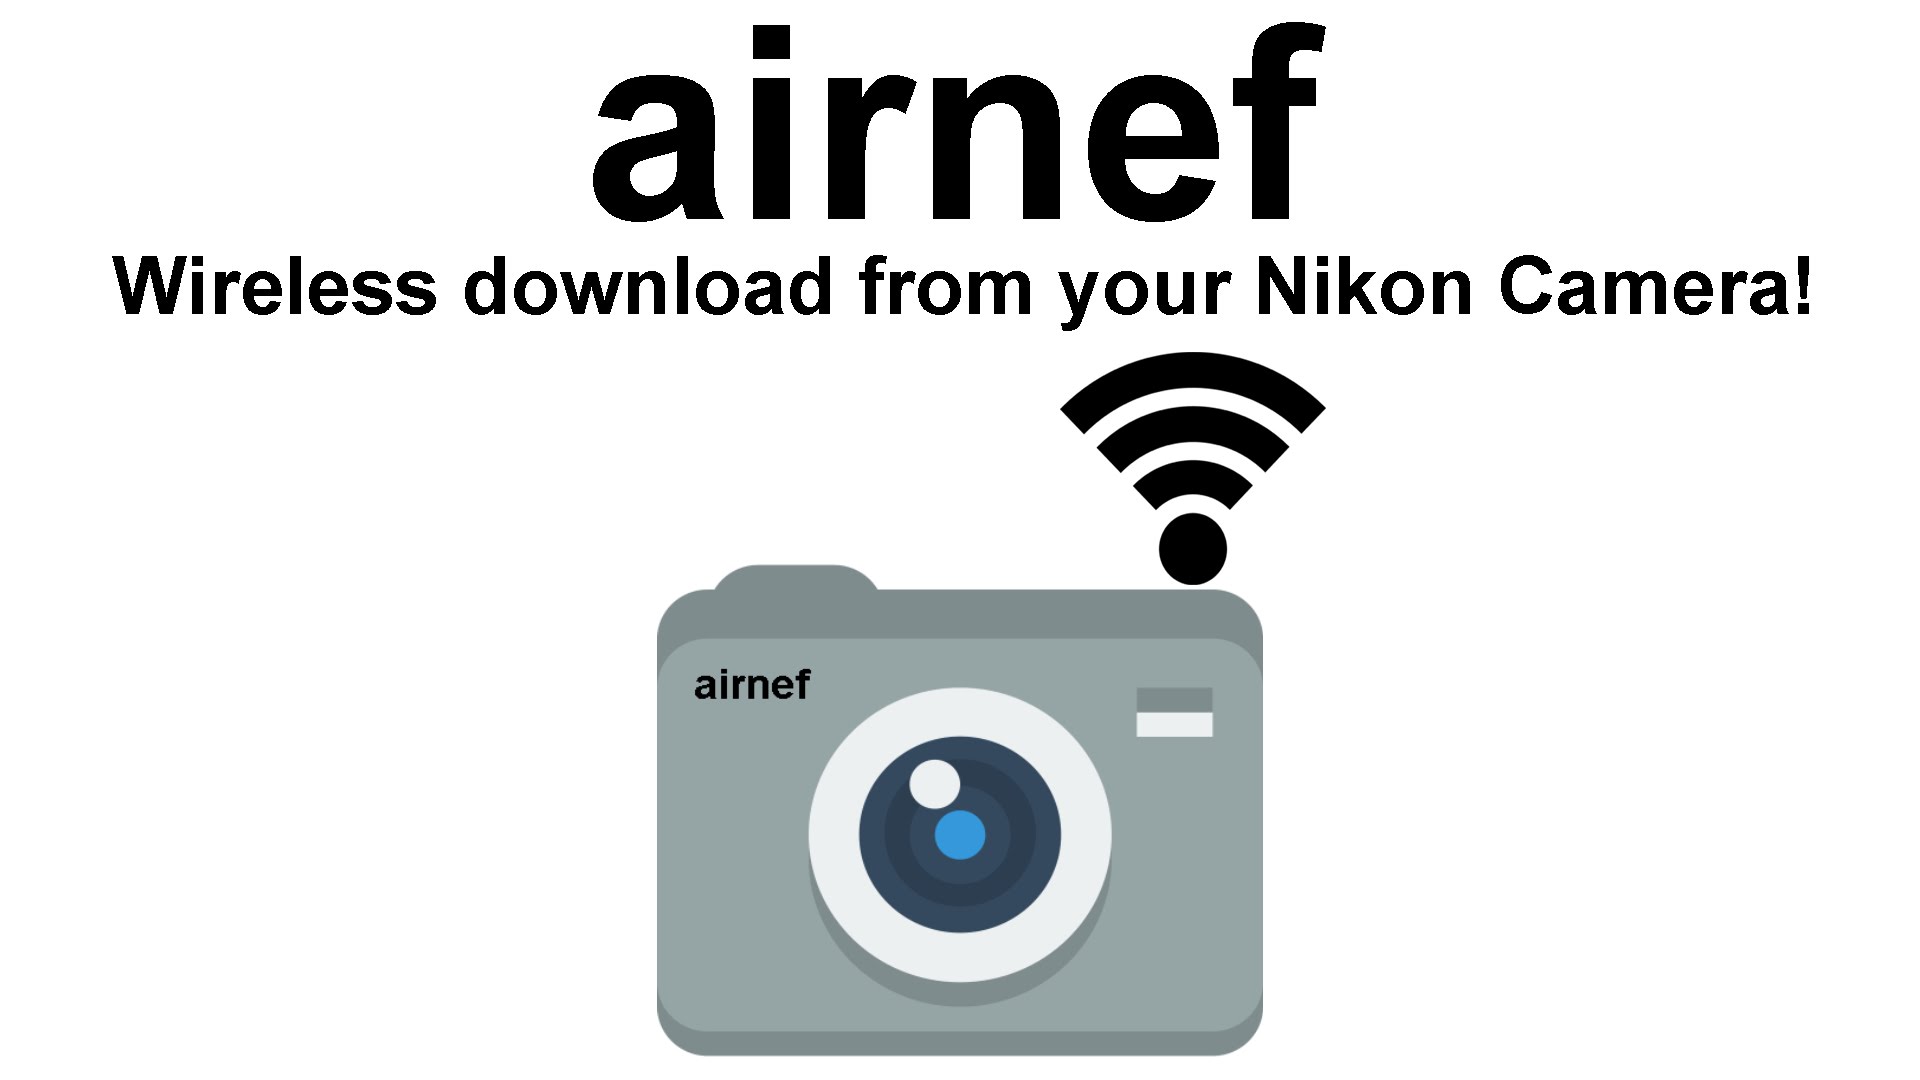 airnef – Wireless image and movie downloads for Nikon cameras!